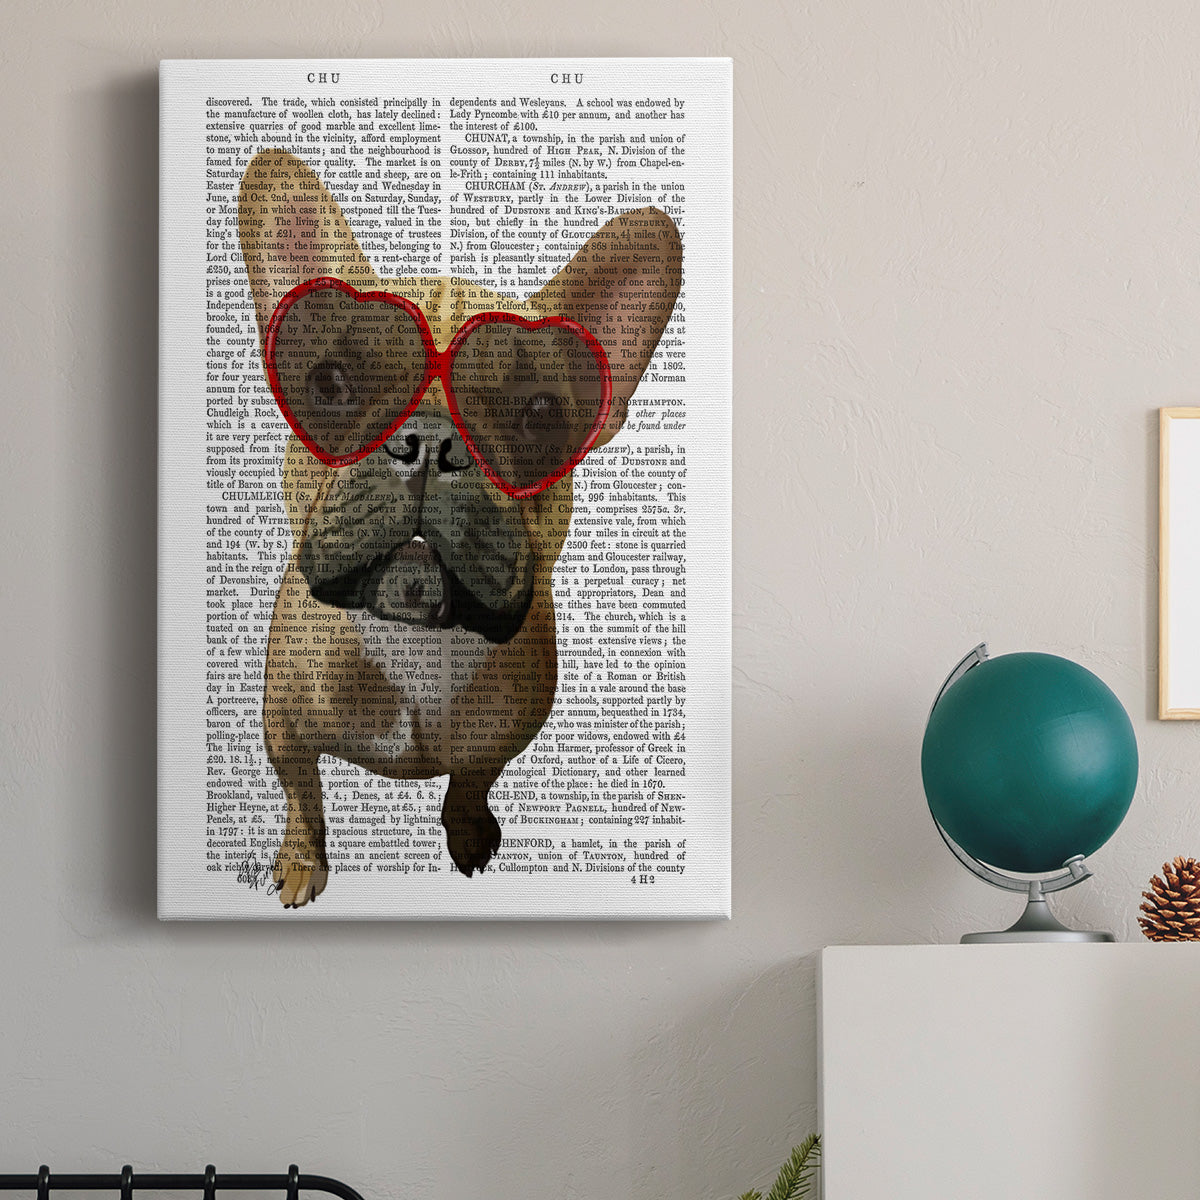 French Bulldog and Heart Glasses Premium Gallery Wrapped Canvas - Ready to Hang